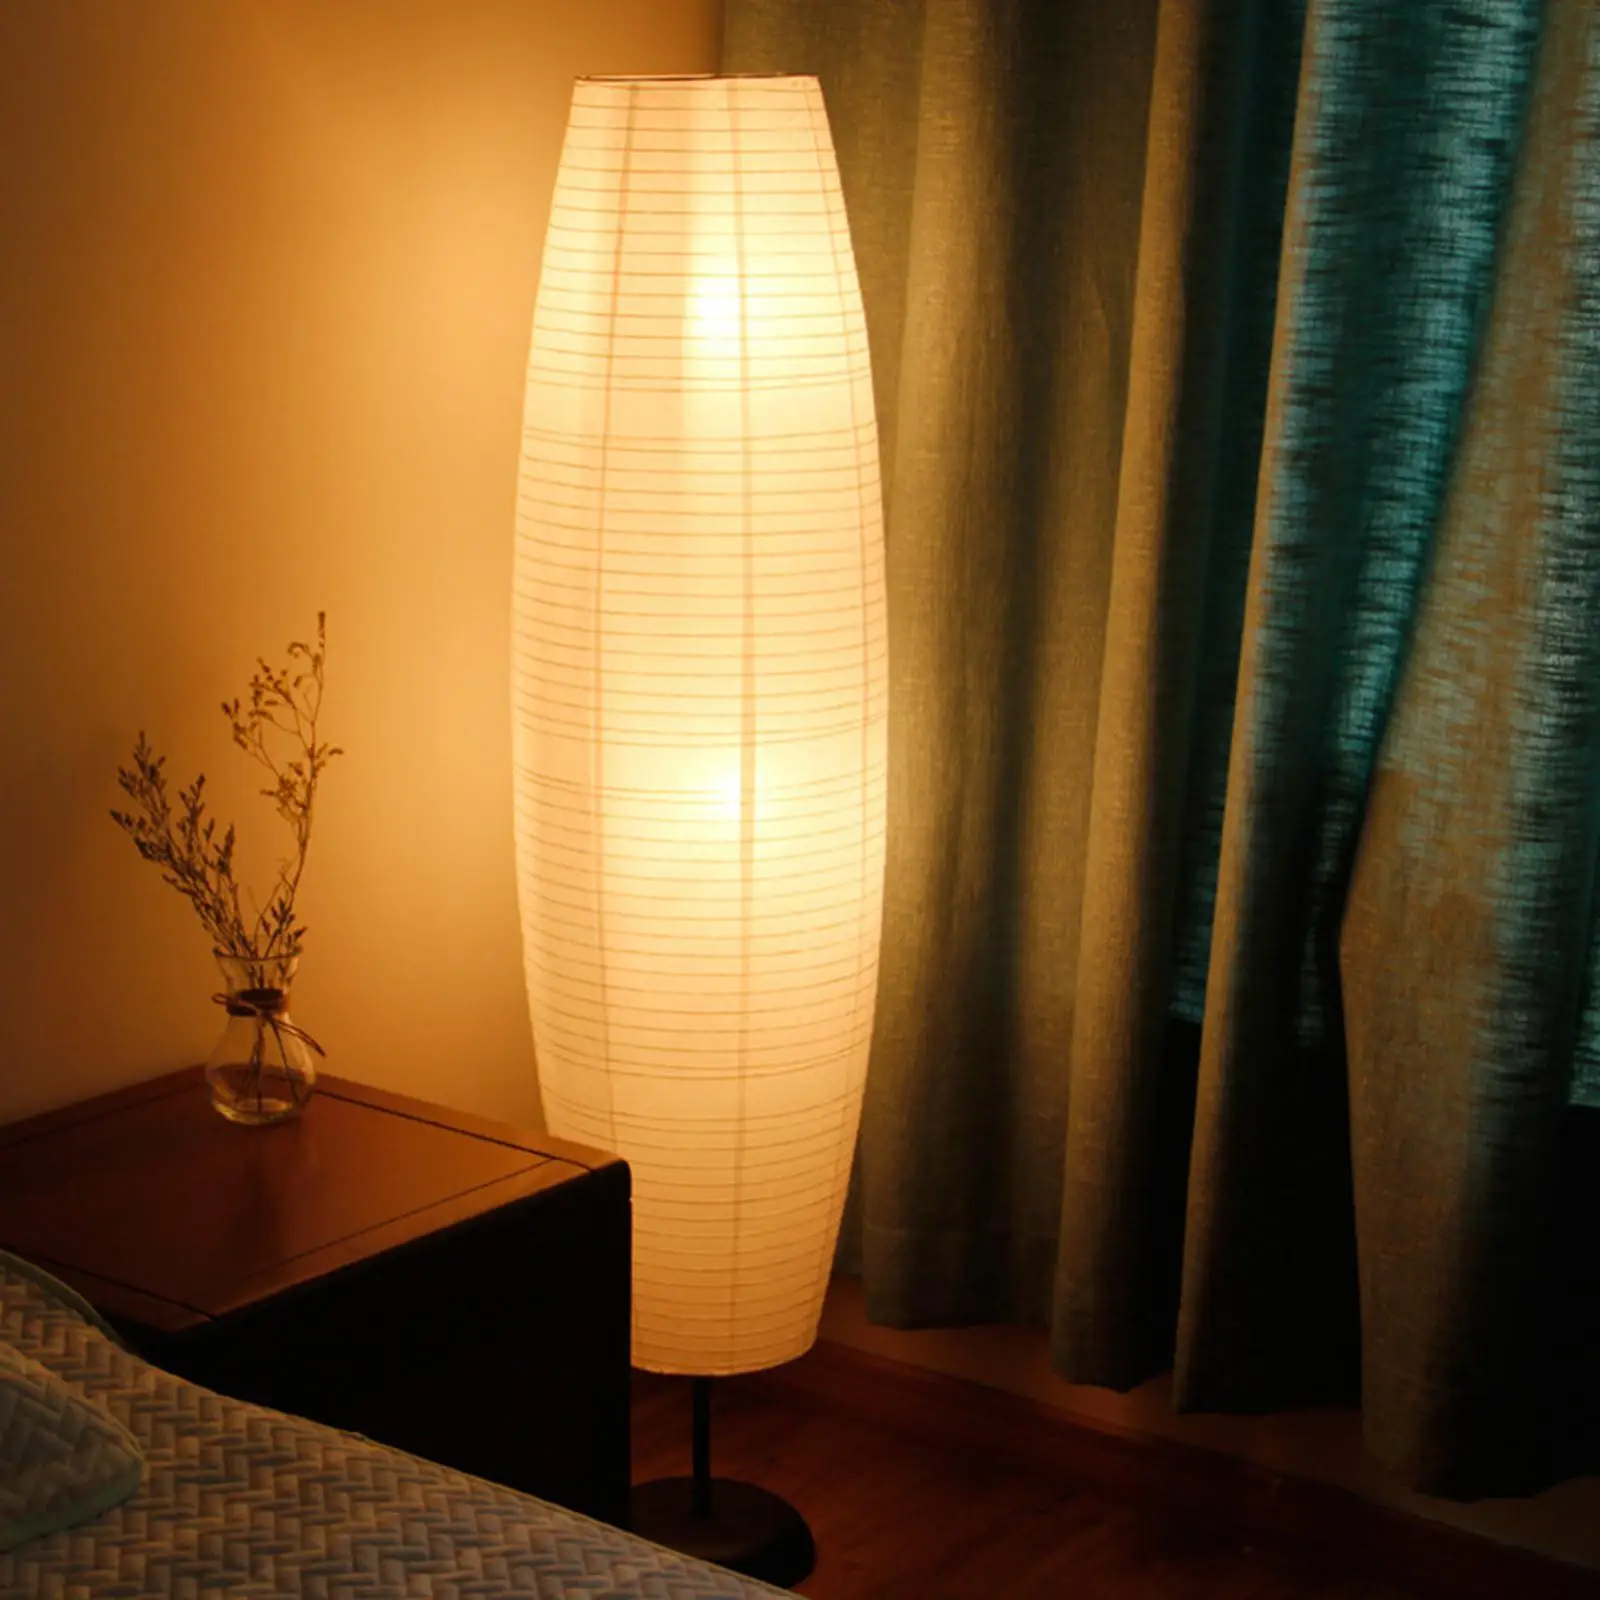 Modern Standing Lights with Lampshade, Bulb Pole Light Uplighter Floor Lamp for Living Room Porch Hotel Balcony Study